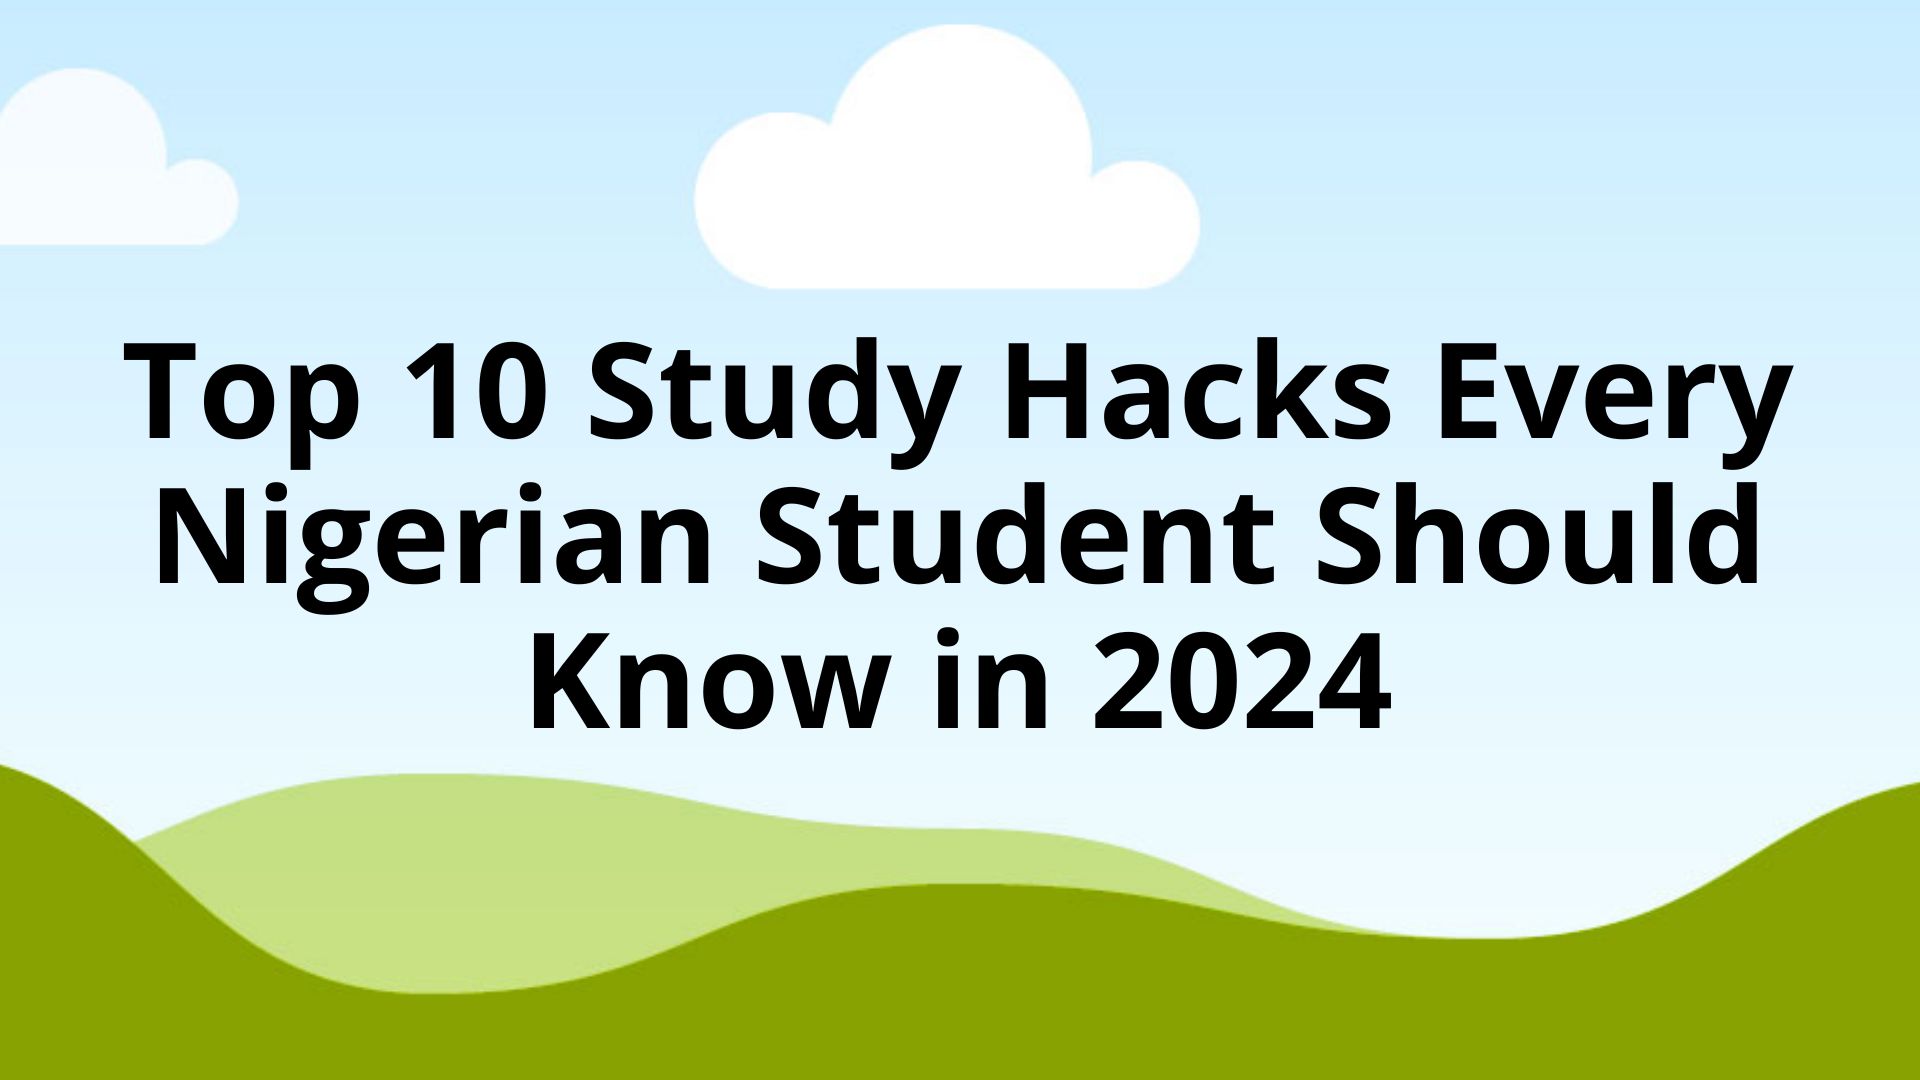 Top 10 Study Hacks Every Nigerian Student Should Know in 2024